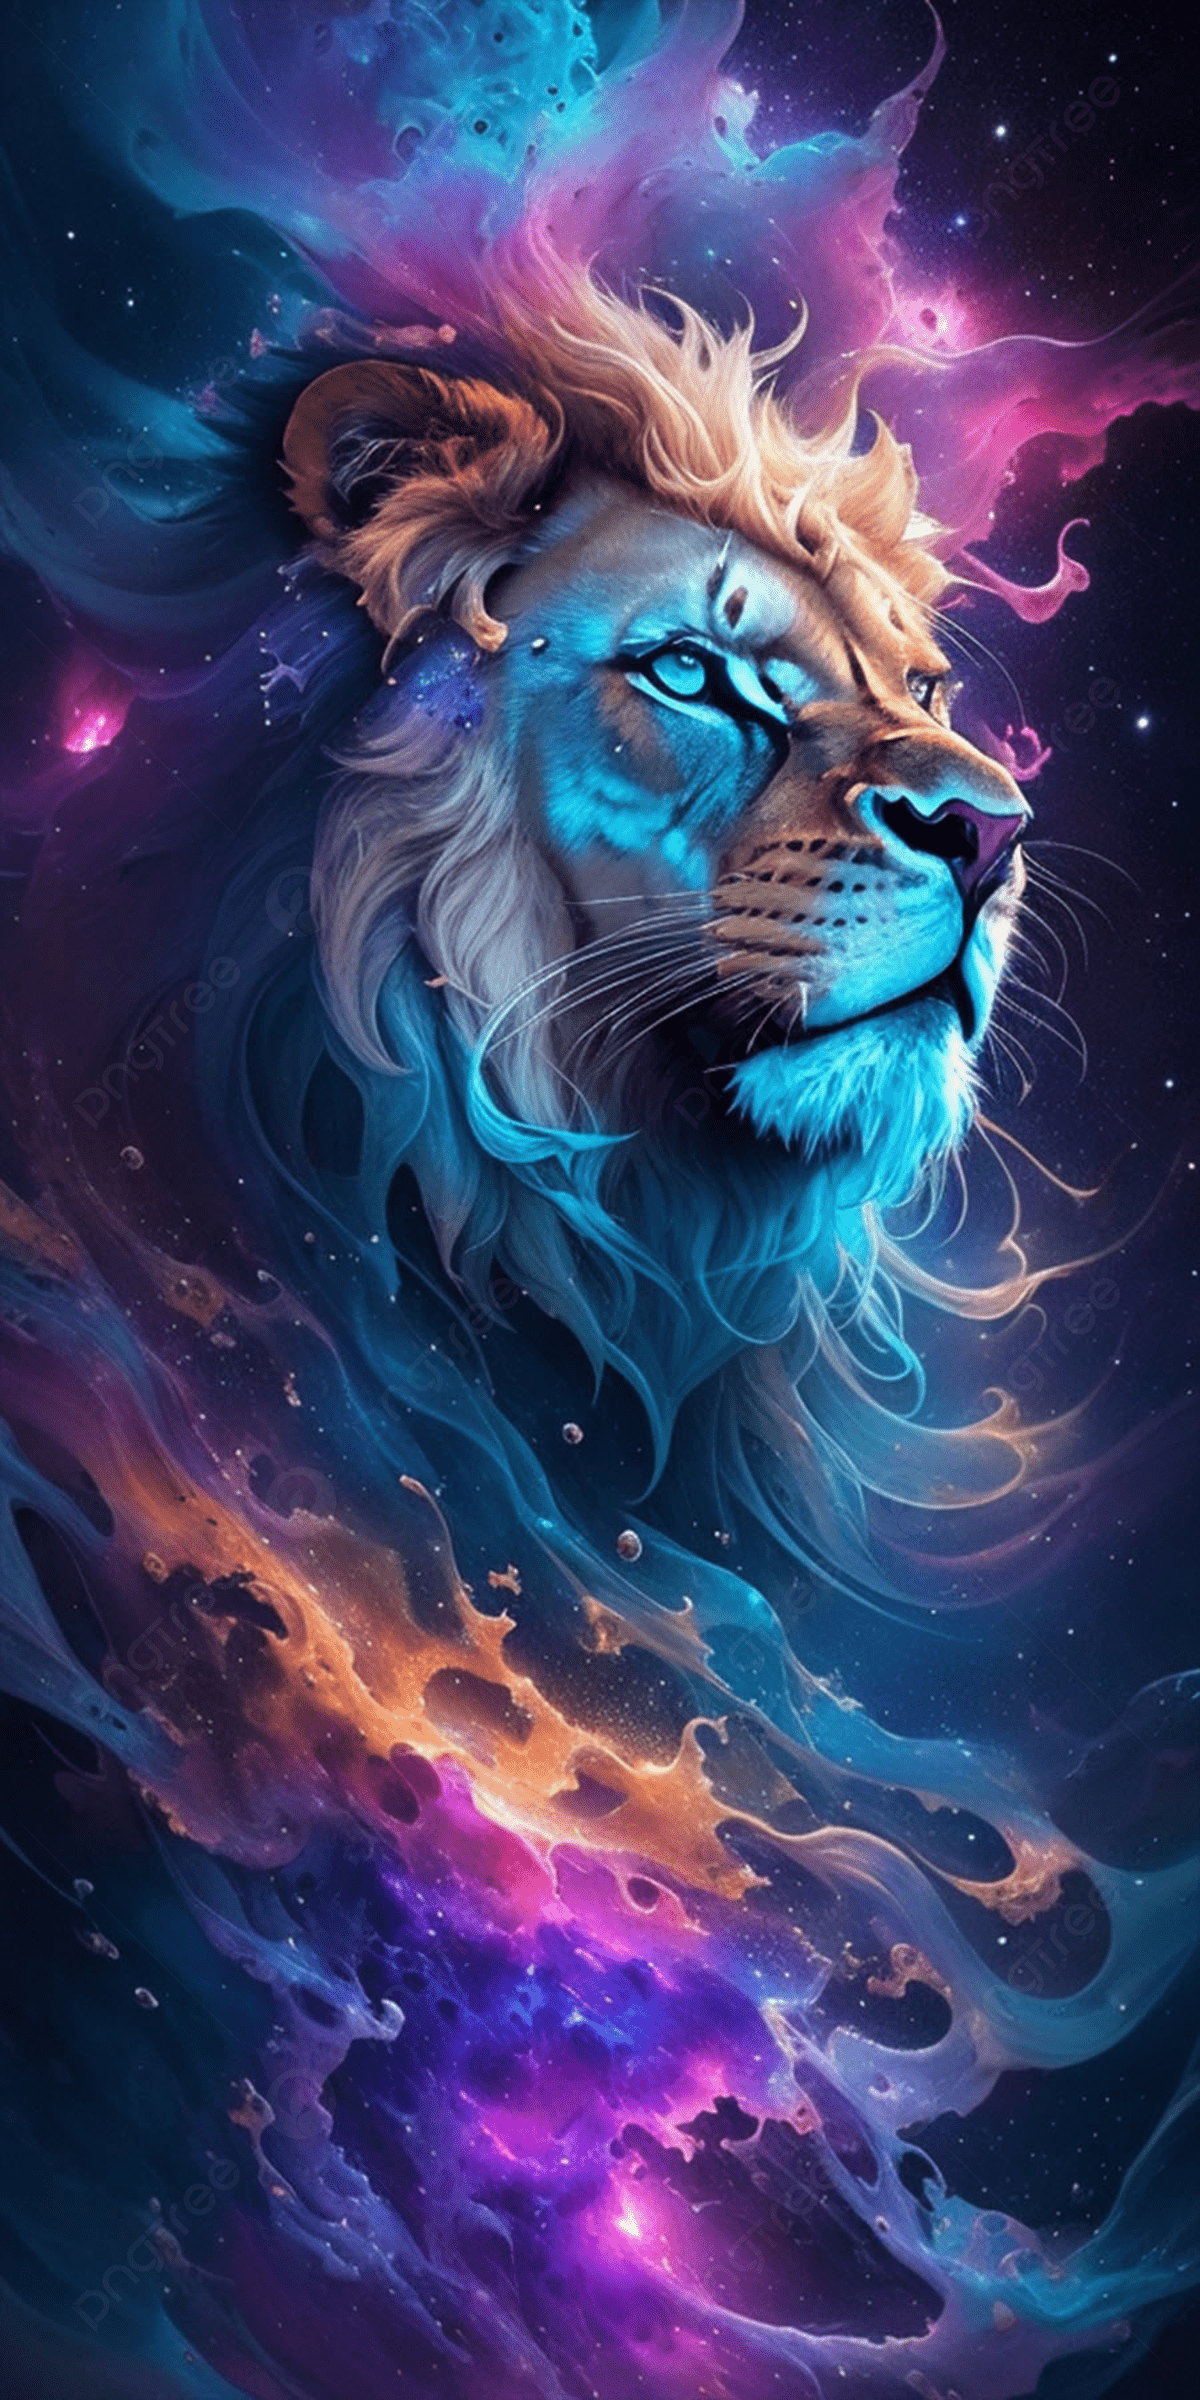 The king of the jungle in space - Lion